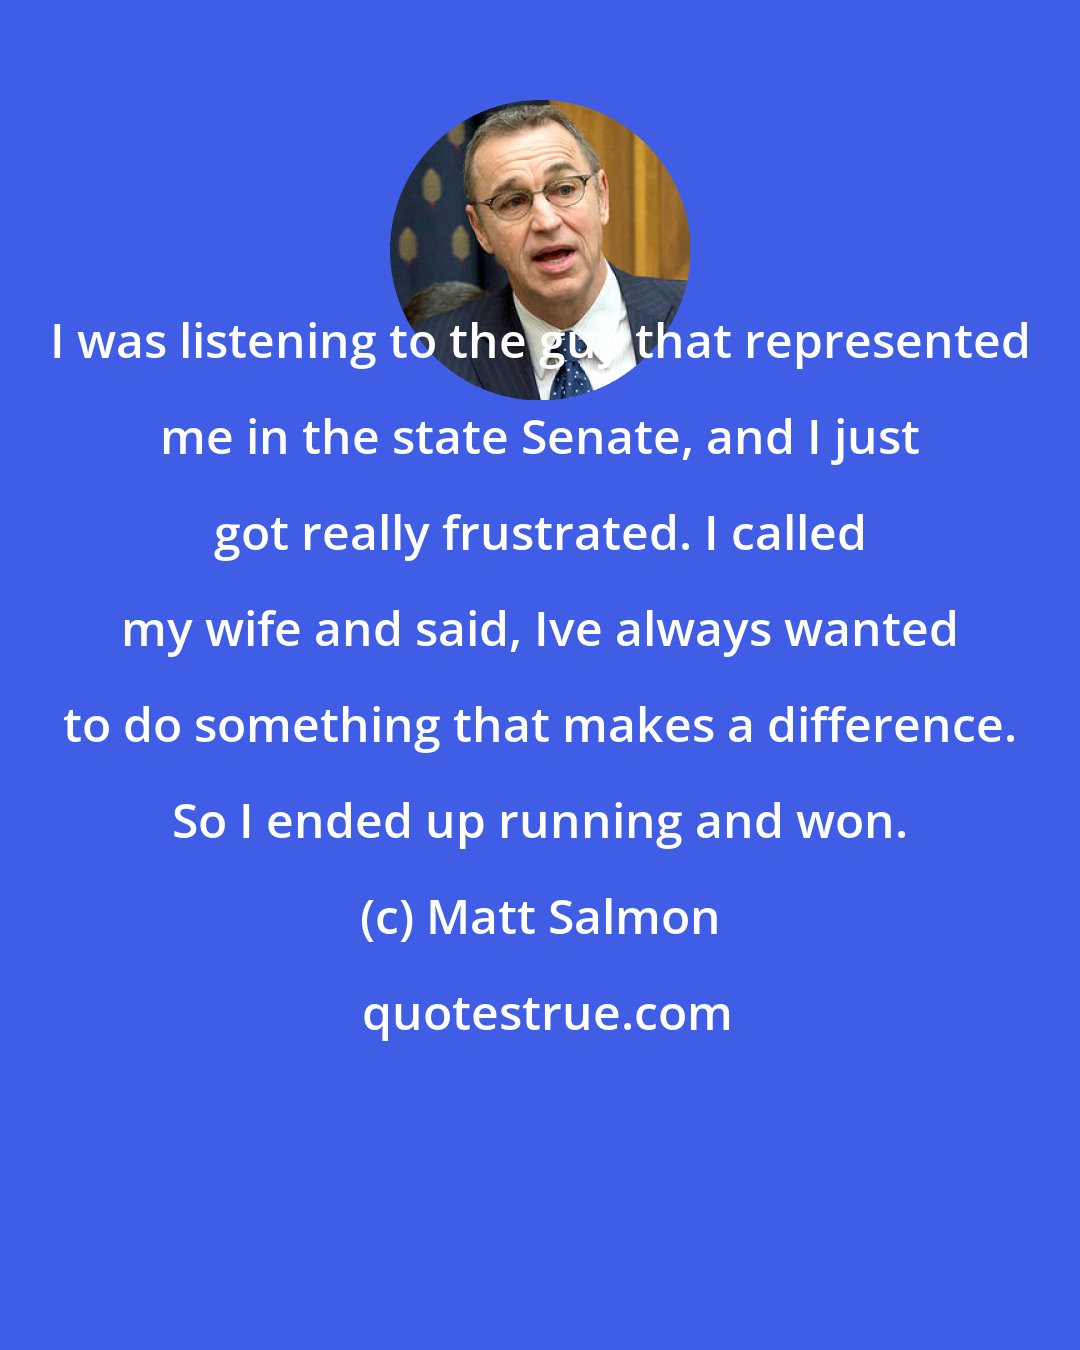 Matt Salmon: I was listening to the guy that represented me in the state Senate, and I just got really frustrated. I called my wife and said, Ive always wanted to do something that makes a difference. So I ended up running and won.